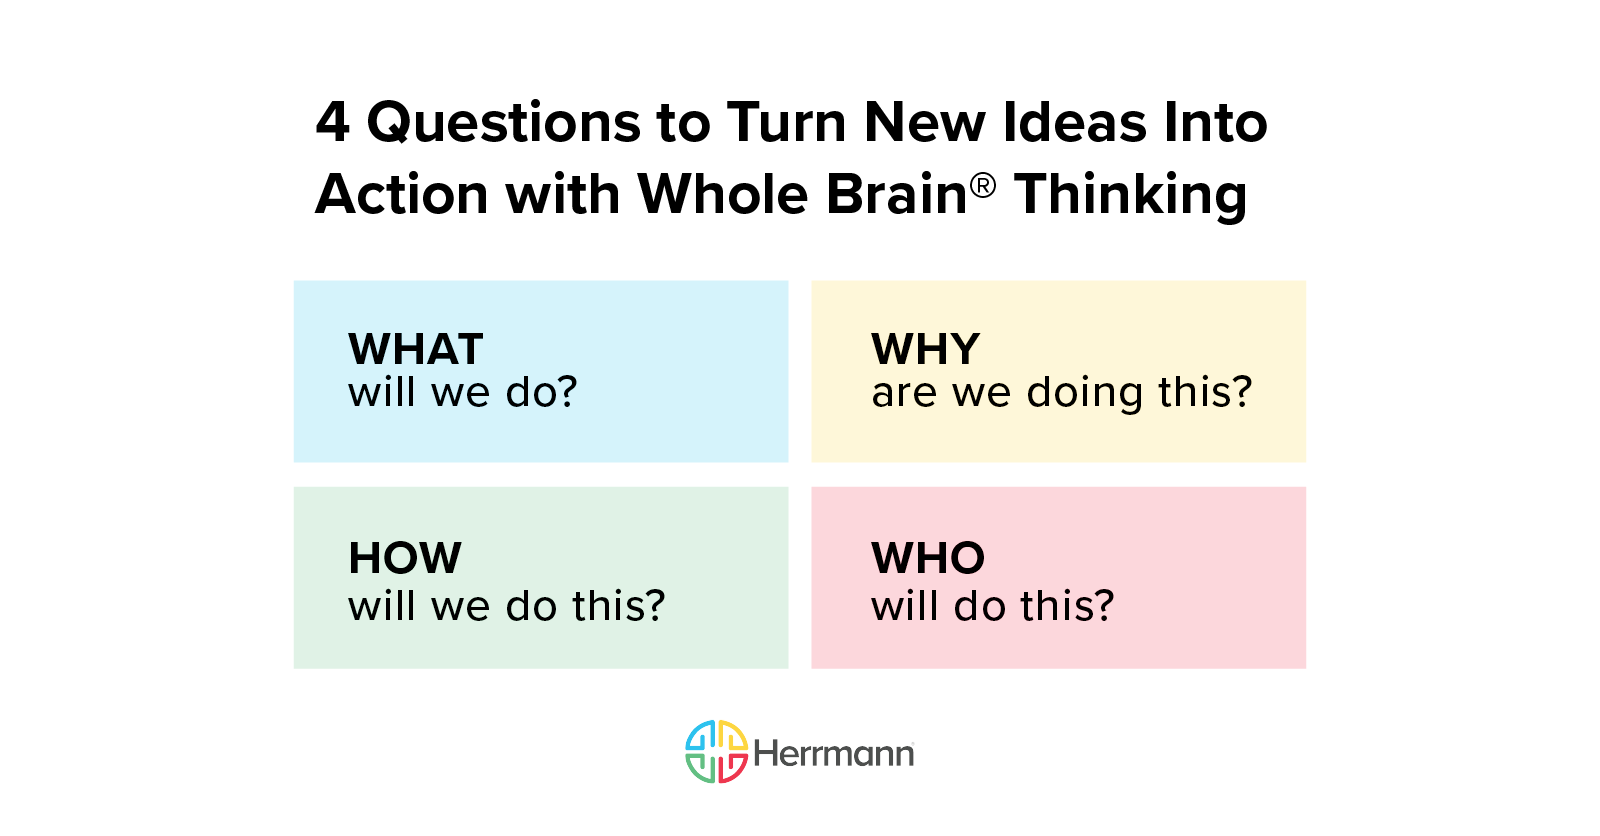 4 Questions to Turn New Ideas Into Action with Whole Brain Thinking